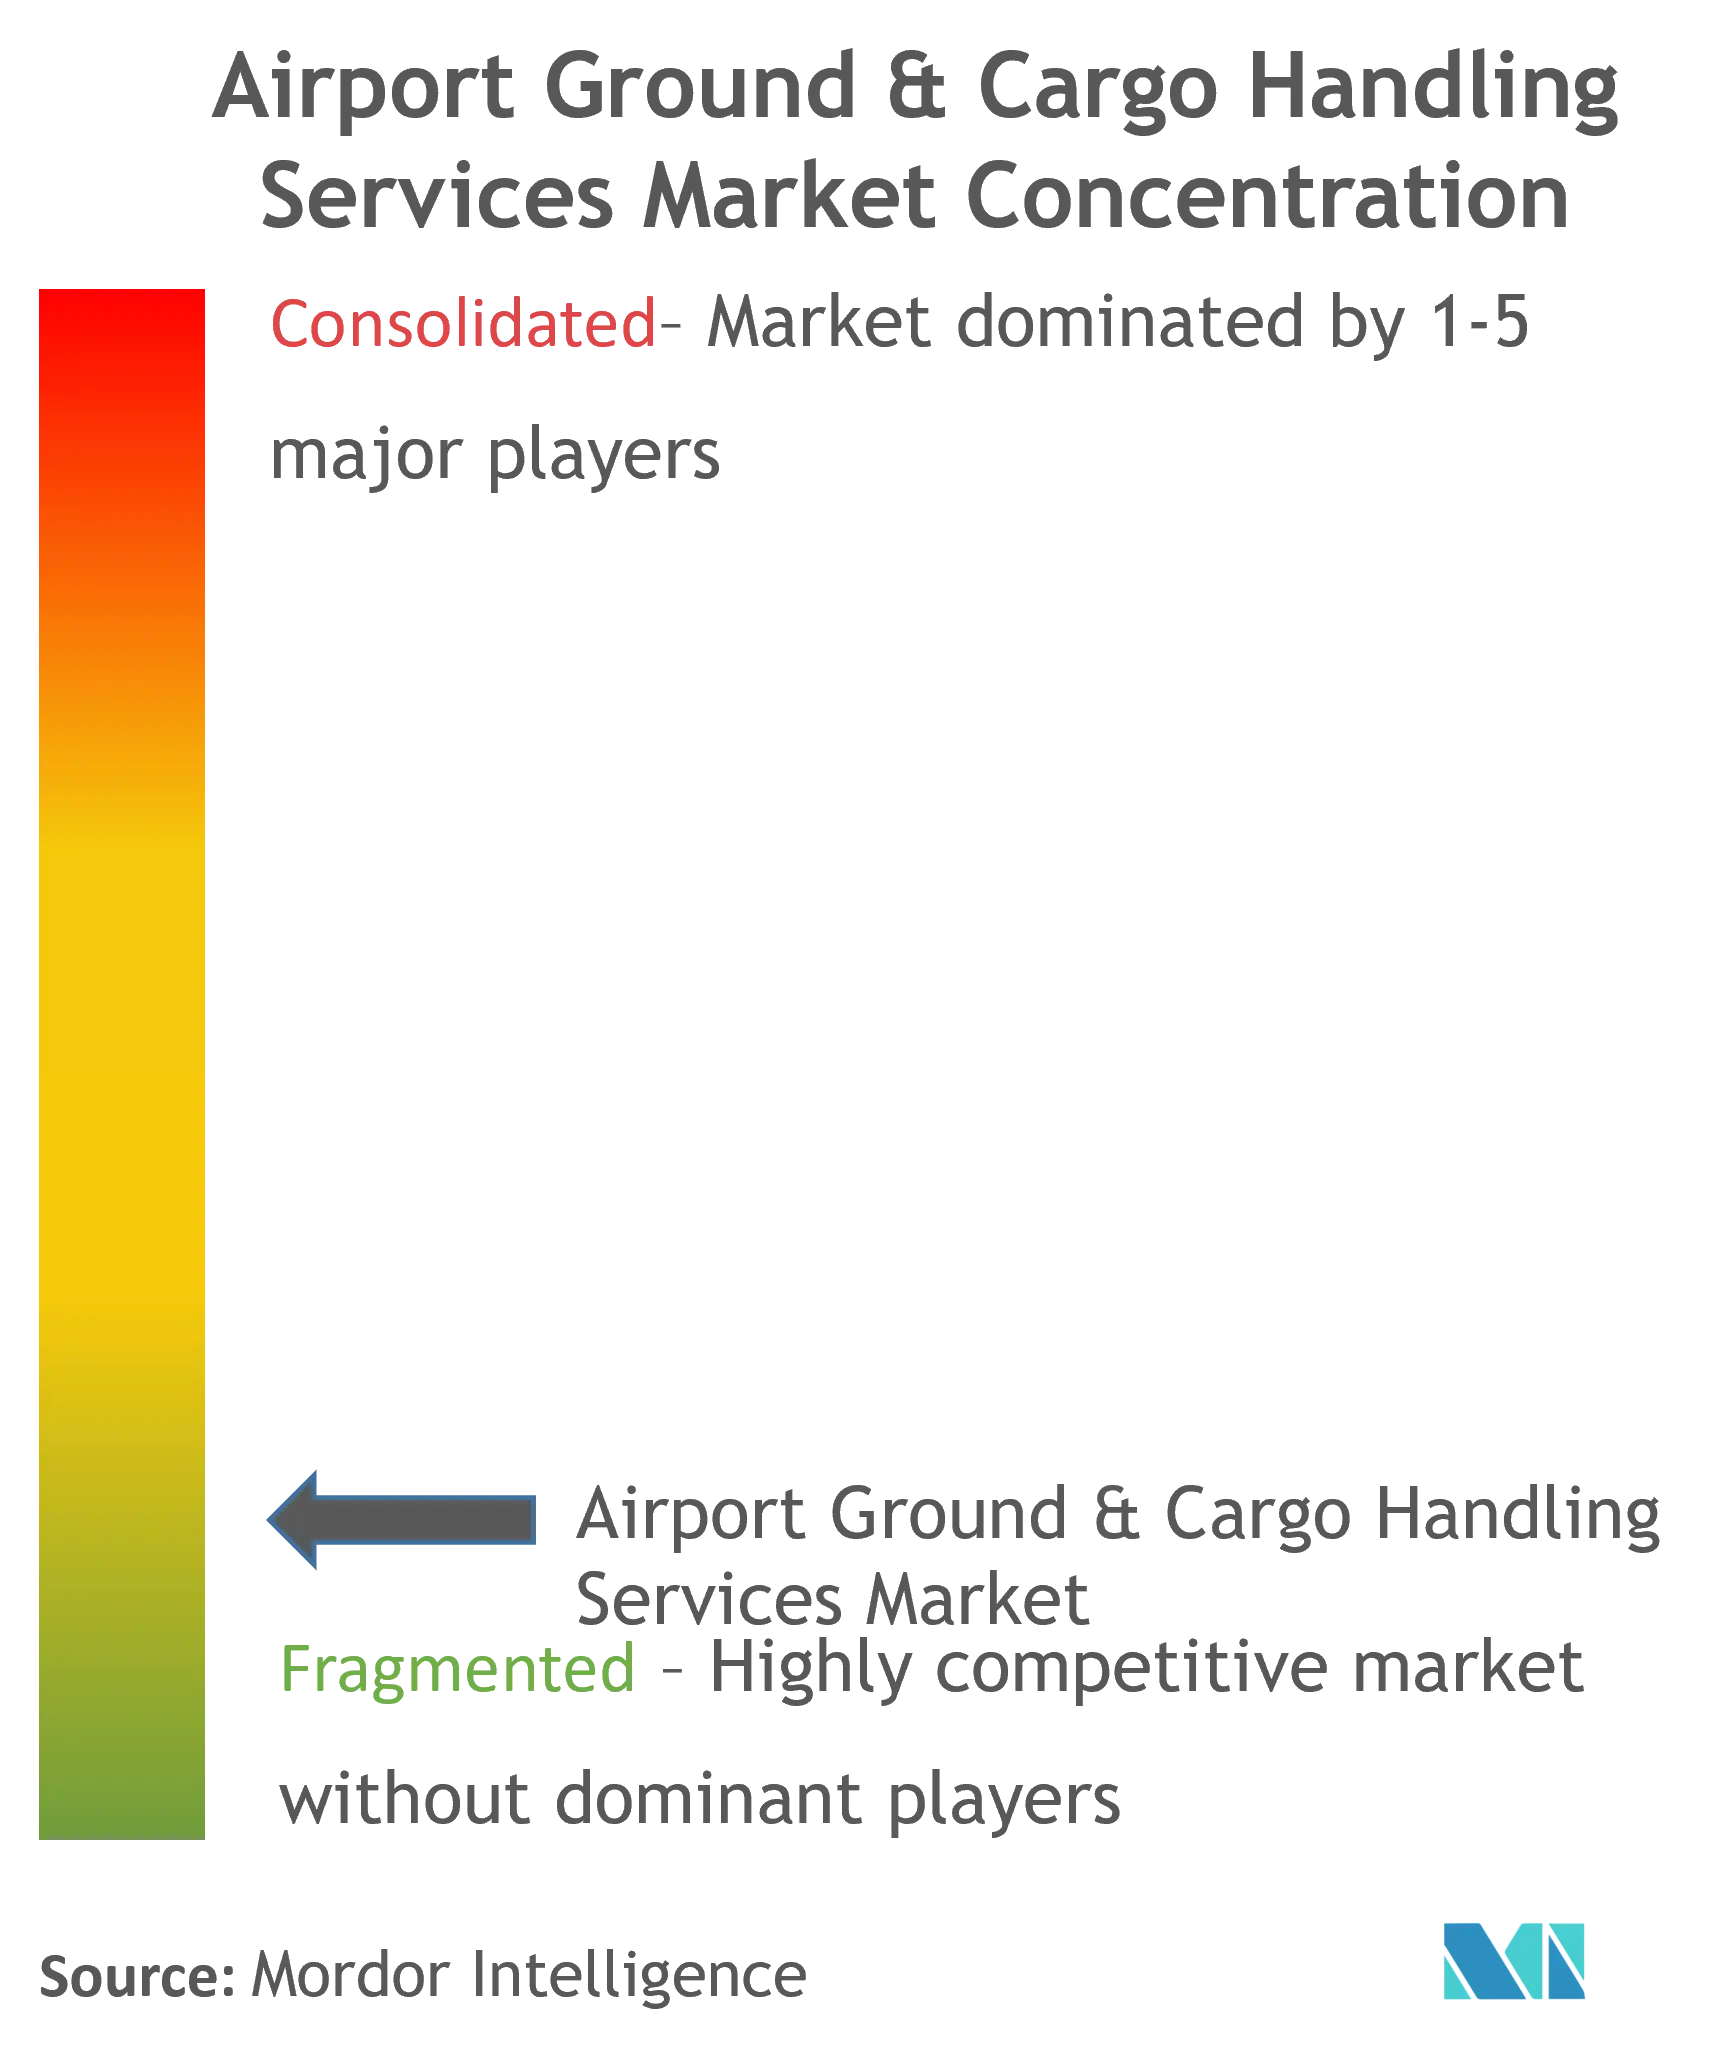 Airport Ground Handling Systems Market Concentration